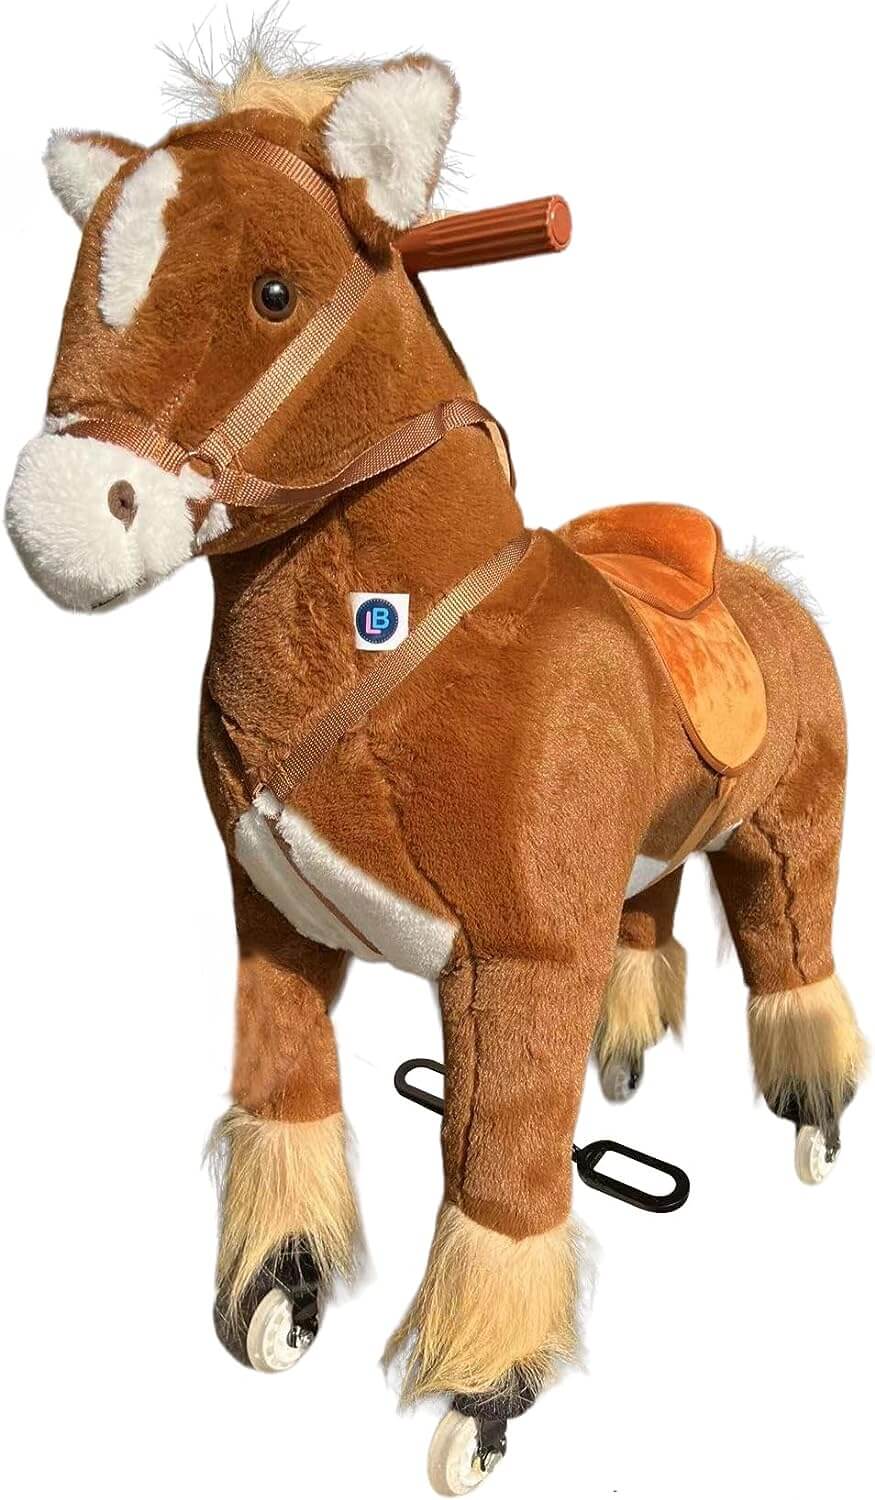 Megastar Ride on Gallop 'n' Play: Action-Packed Mechanical My Horse Rider Toy for Kids-Brown